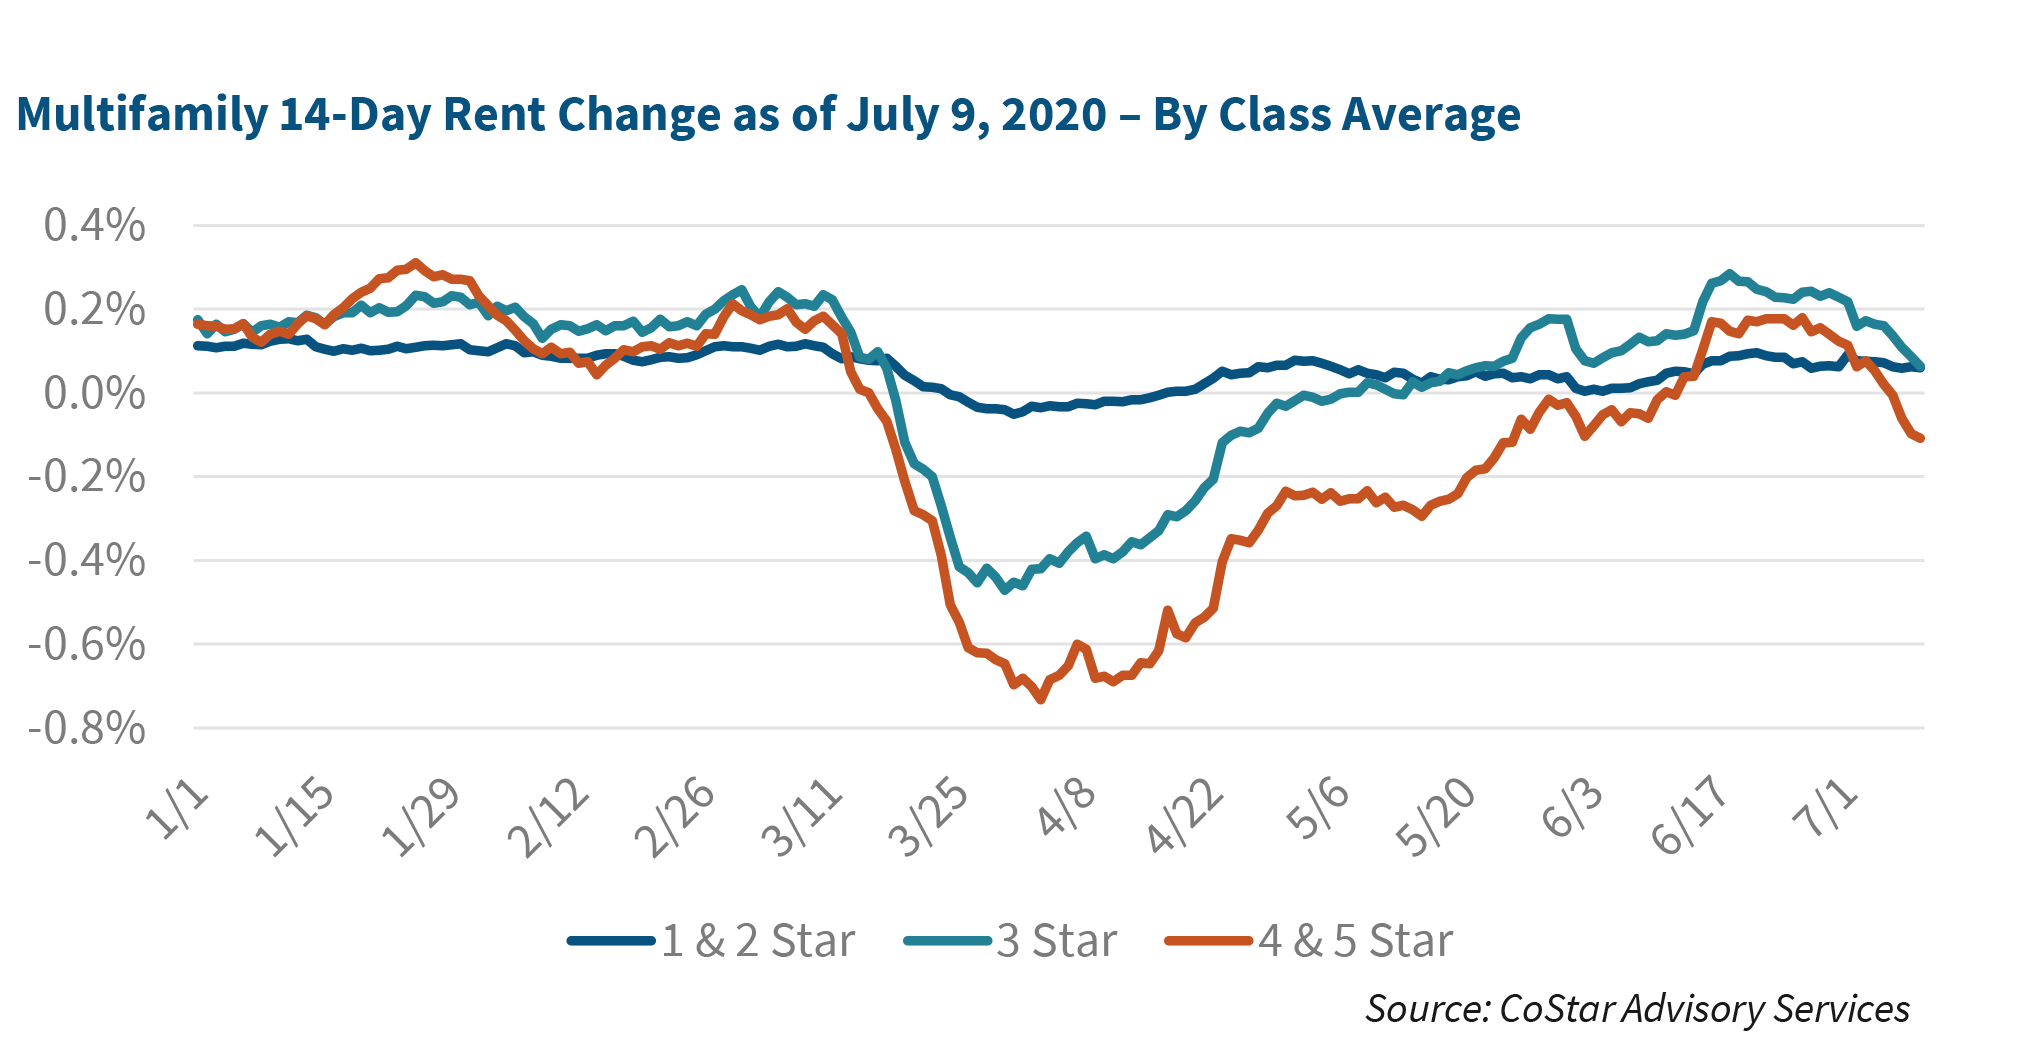 Multifamily 14-Day Rent Change as of July 9, 2020 – By Class Average